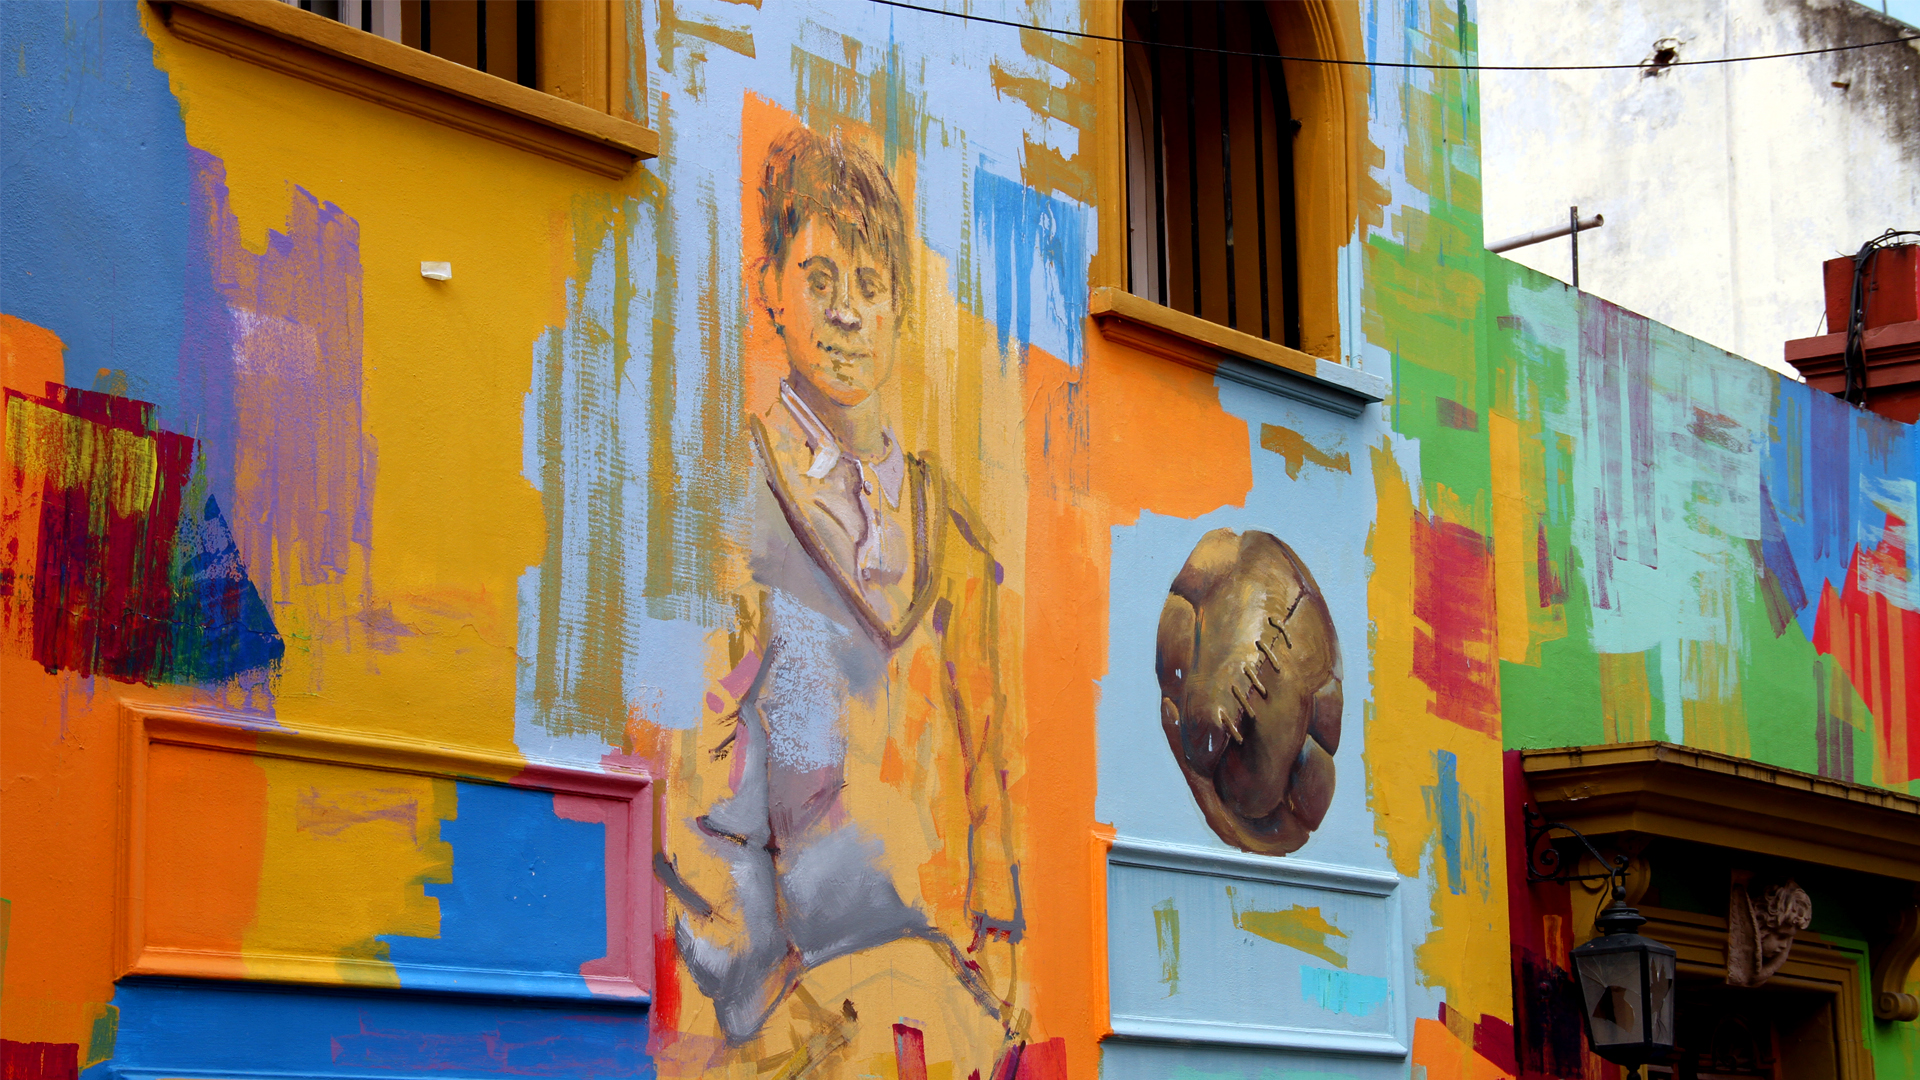 colorful graffiti on the side of a building